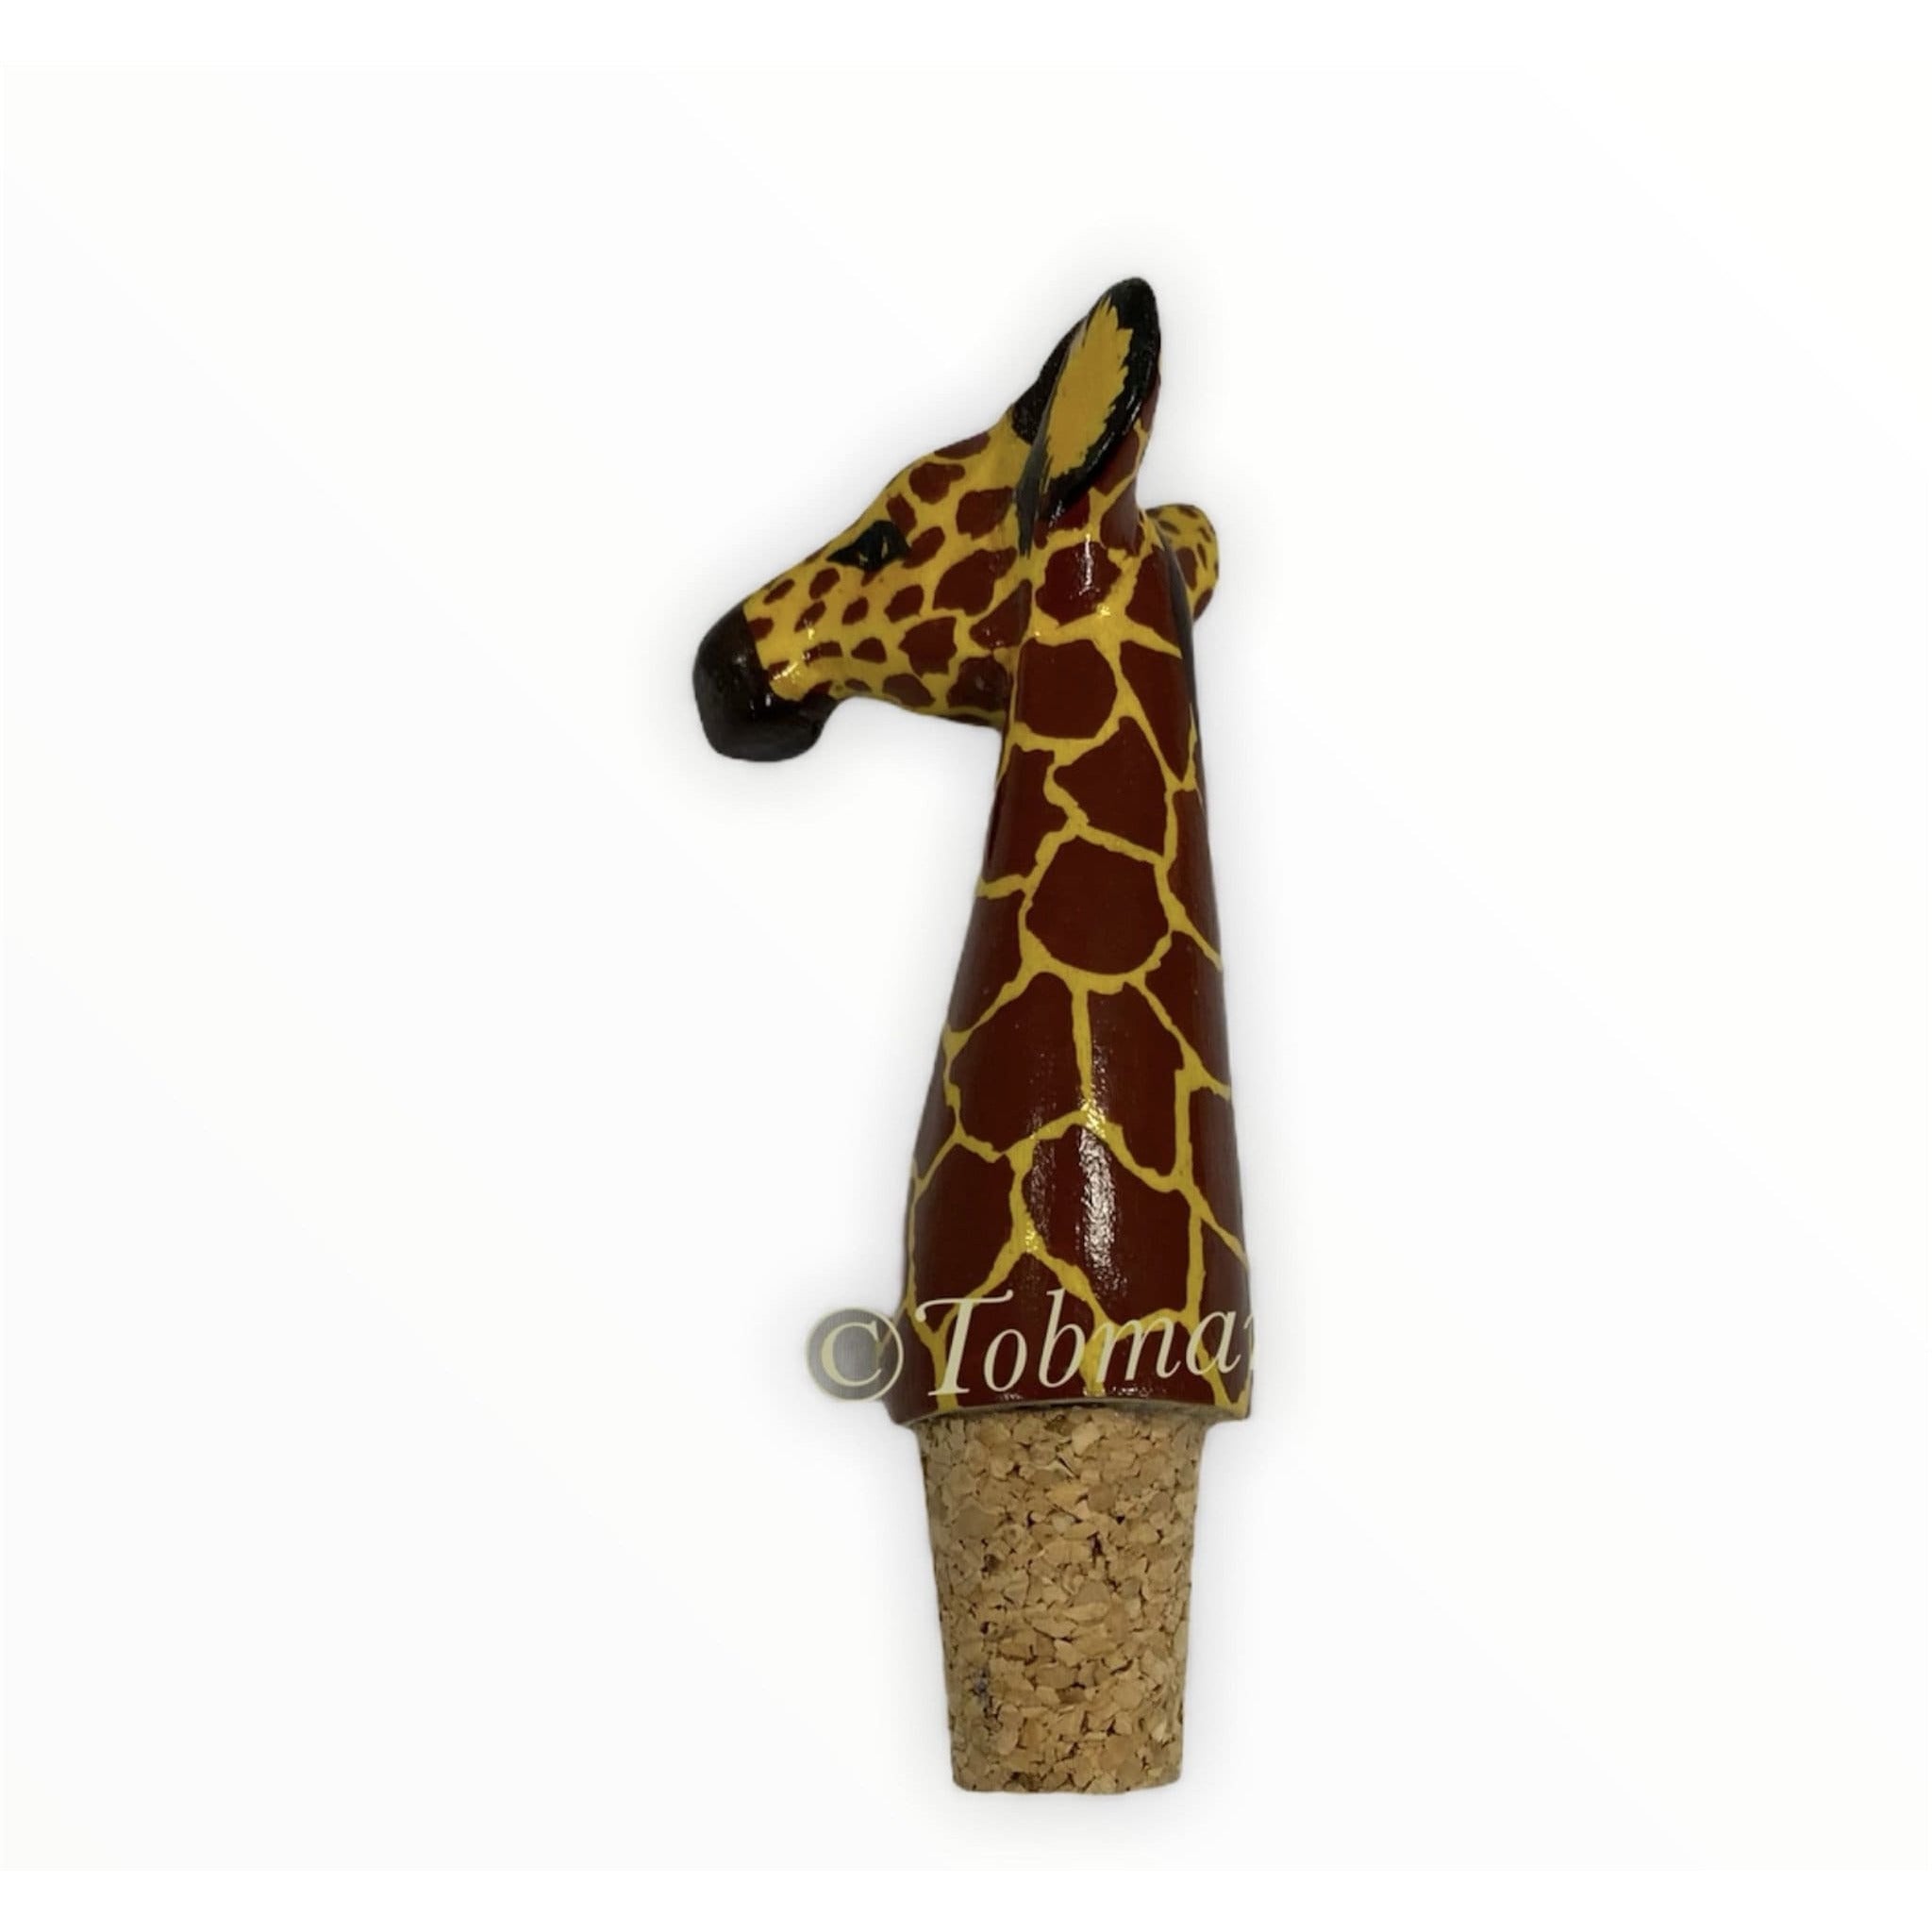 Tobmarc Home Decor & Gifts  giraffe Wine Bottle stoppers with Animal Designs, Decorative Wooden Beverage Stopper